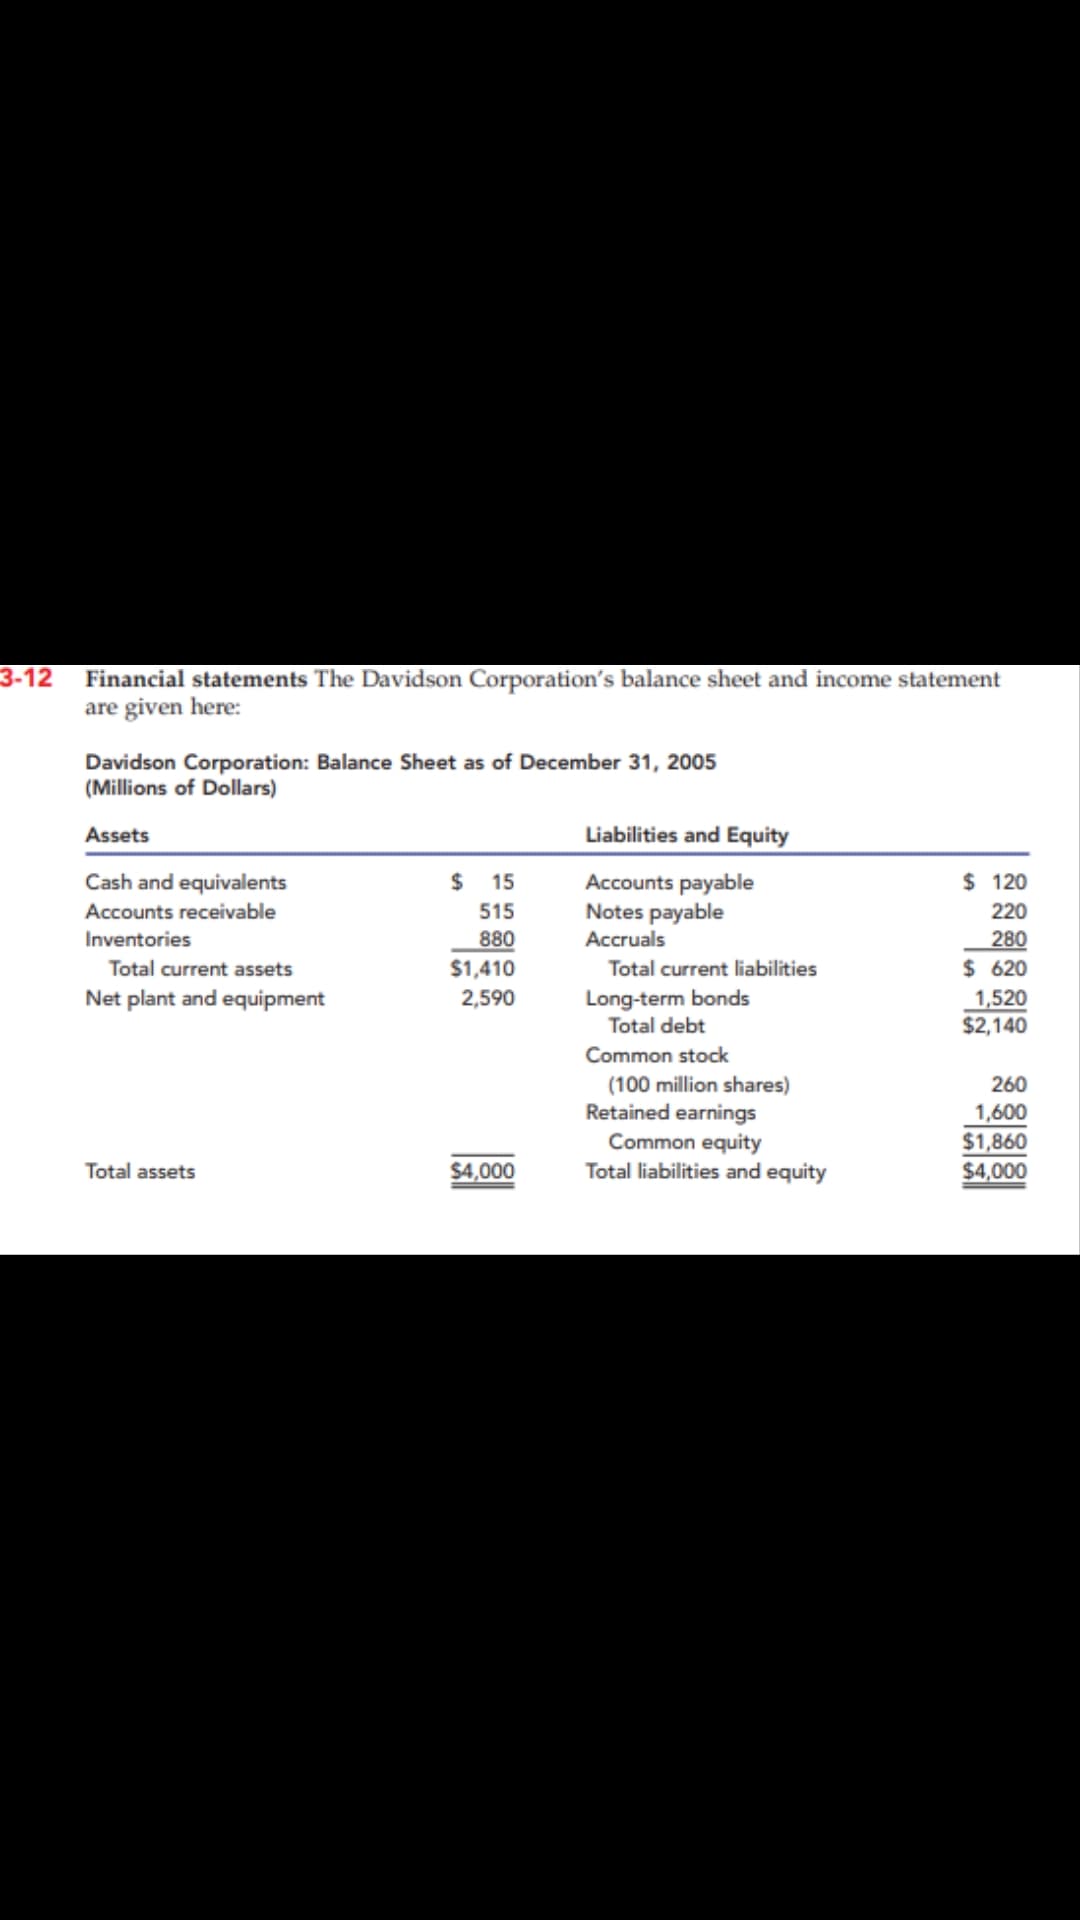 3-12 Financial statements The Davidson Corporation's balance sheet and income statement
are given here:
Davidson Corporation: Balance Sheet as of December 31, 2005
(Millions of Dollars)
Assets
Liabilities and Equity
$ 15
Cash and equivalents
Accounts receivable
Accounts payable
Notes payable
Accruals
$ 120
515
220
Inventories
880
280
$ 620
1,520
$2,140
Total current assets
$1,410
Total current liabilities
Net plant and equipment
2,590
Long-term bonds
Total debt
Common stock
(100 million shares)
260
Retained earnings
Common equity
Total liabilities and equity
1,600
$1,860
$4,000
Total assets
$4,000
